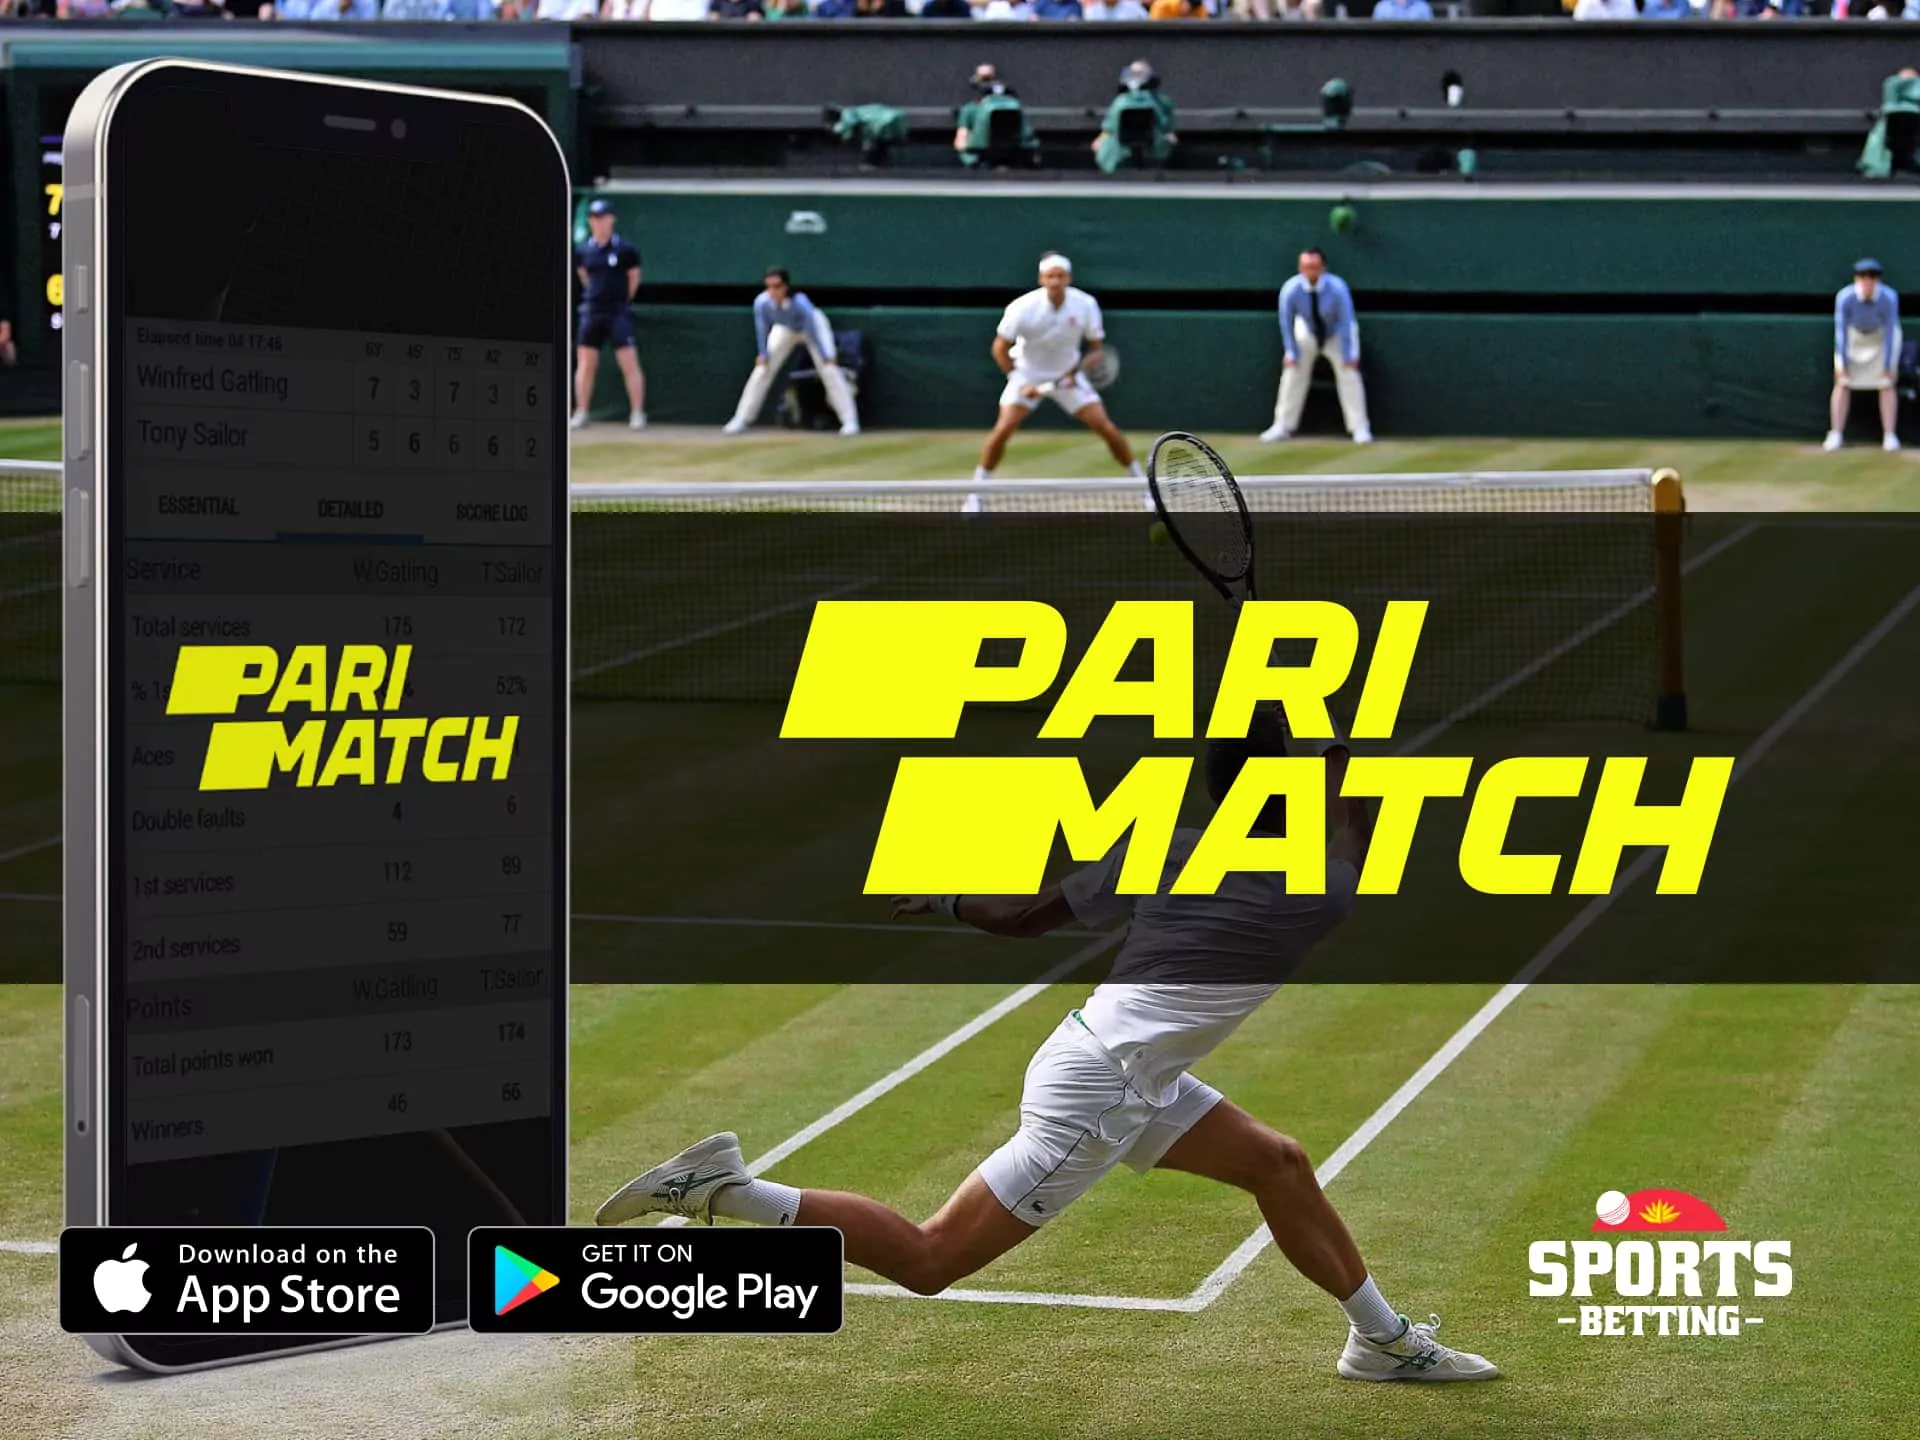 Parimatch tennis betting site with the simplicity of website design.